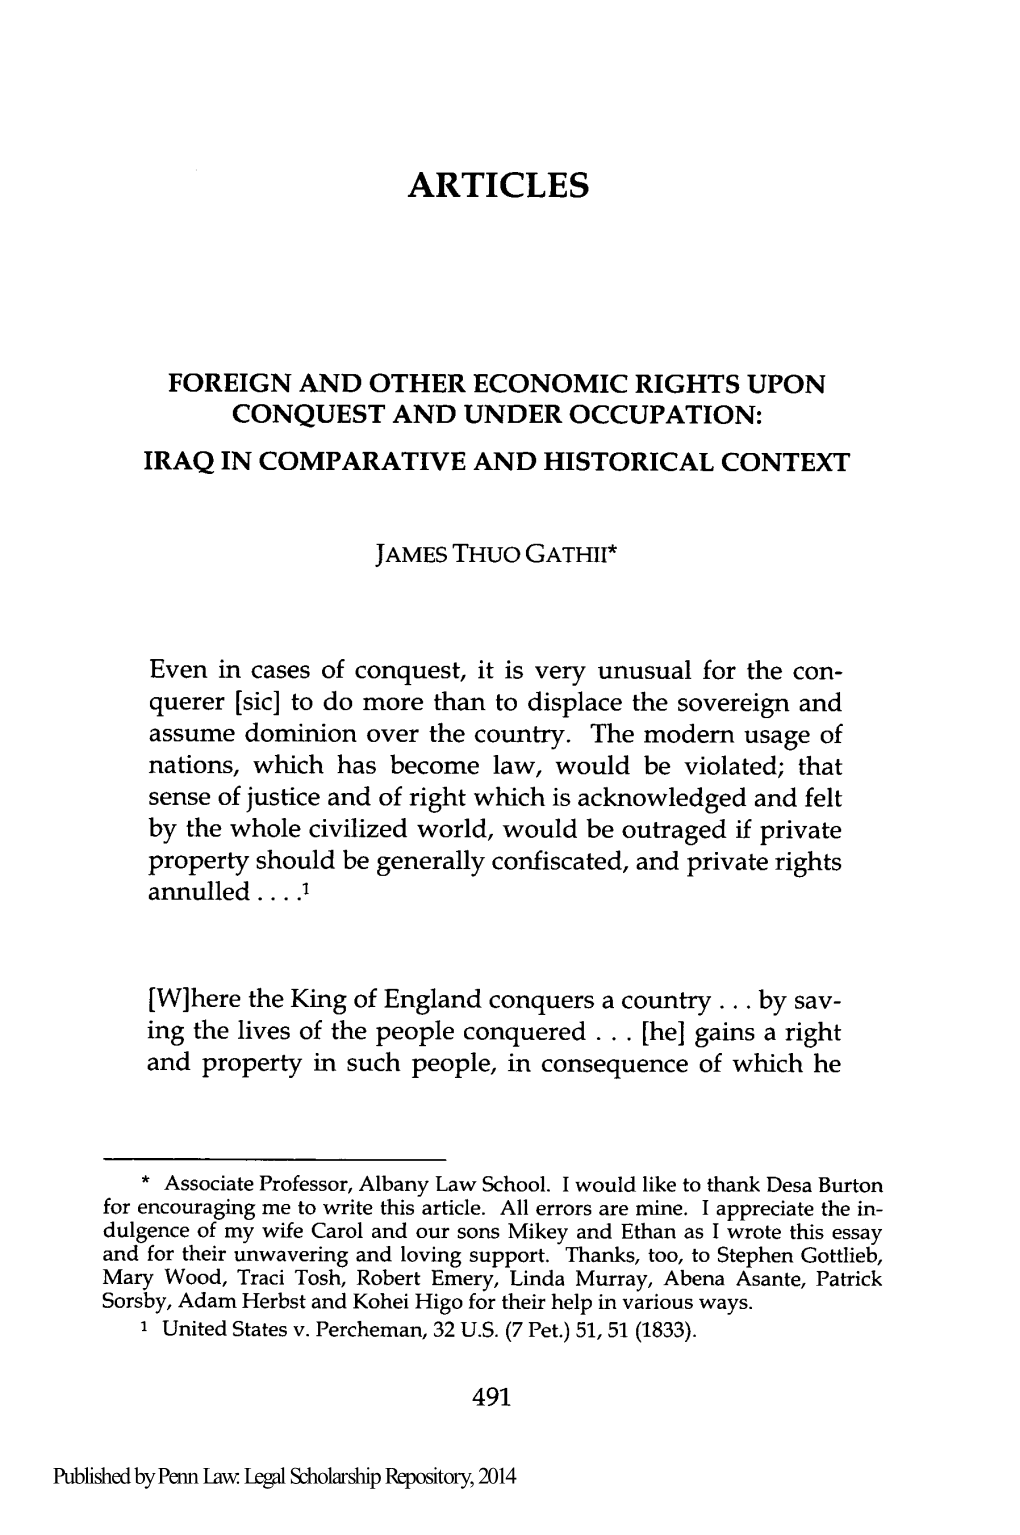 Foreign and Other Economic Rights Upon Conquest and Under Occupation: Iraq in Comparative and Historical Context